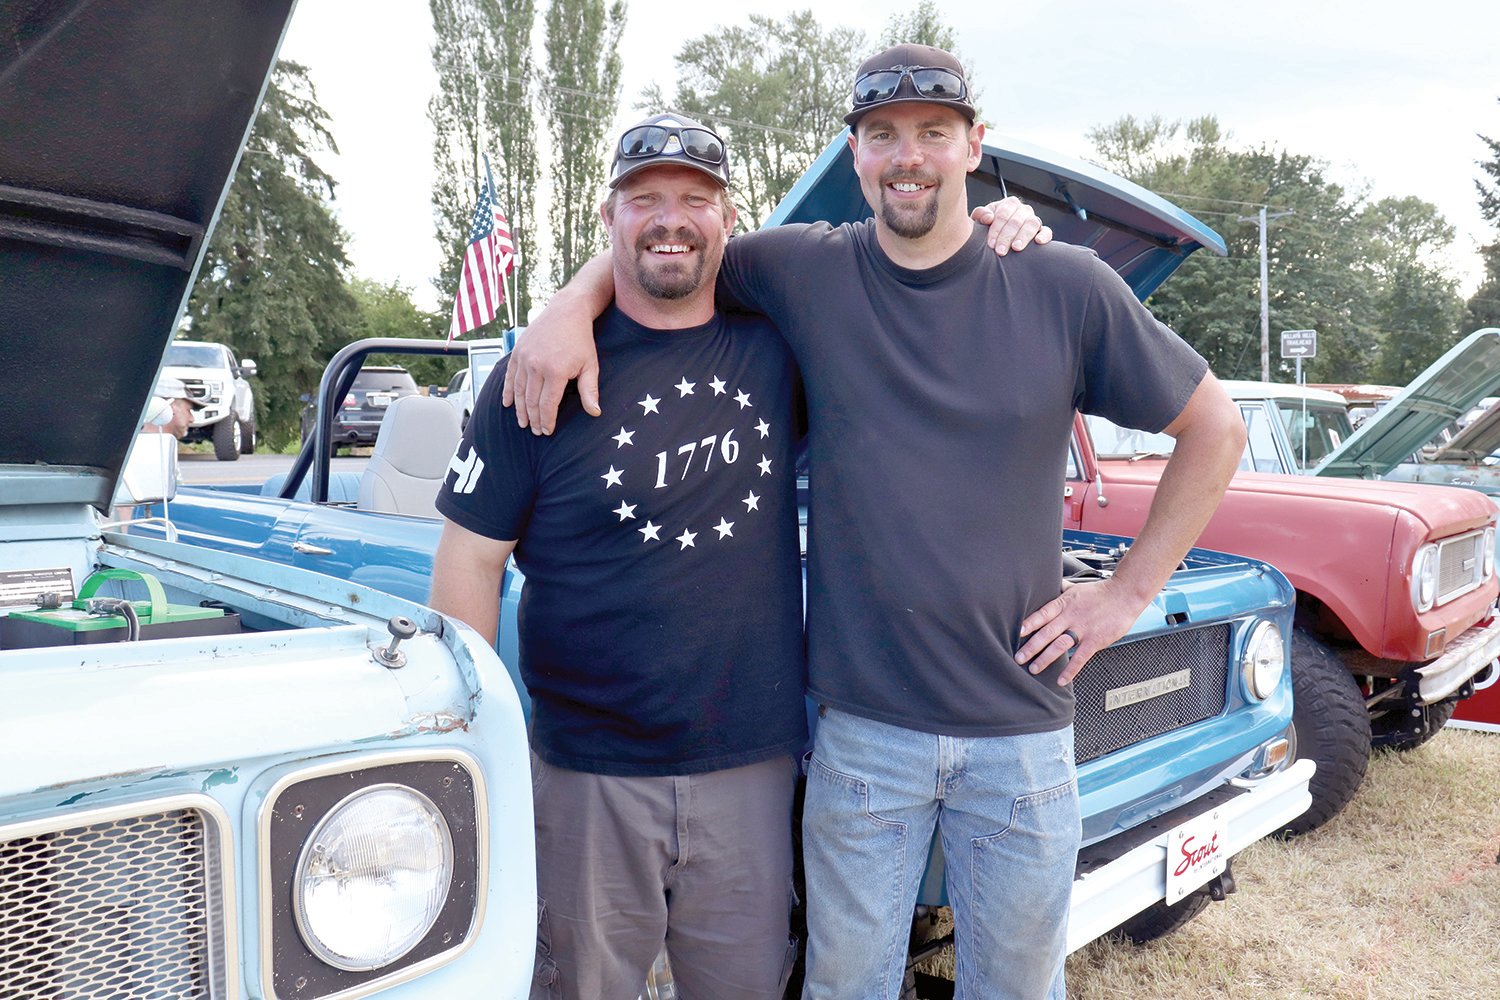 Josh Von Moos, left, and Zach Berg pose for a photo beside their vehicles at the Adna Camp & Cruise Car Show in Adna on Friday.